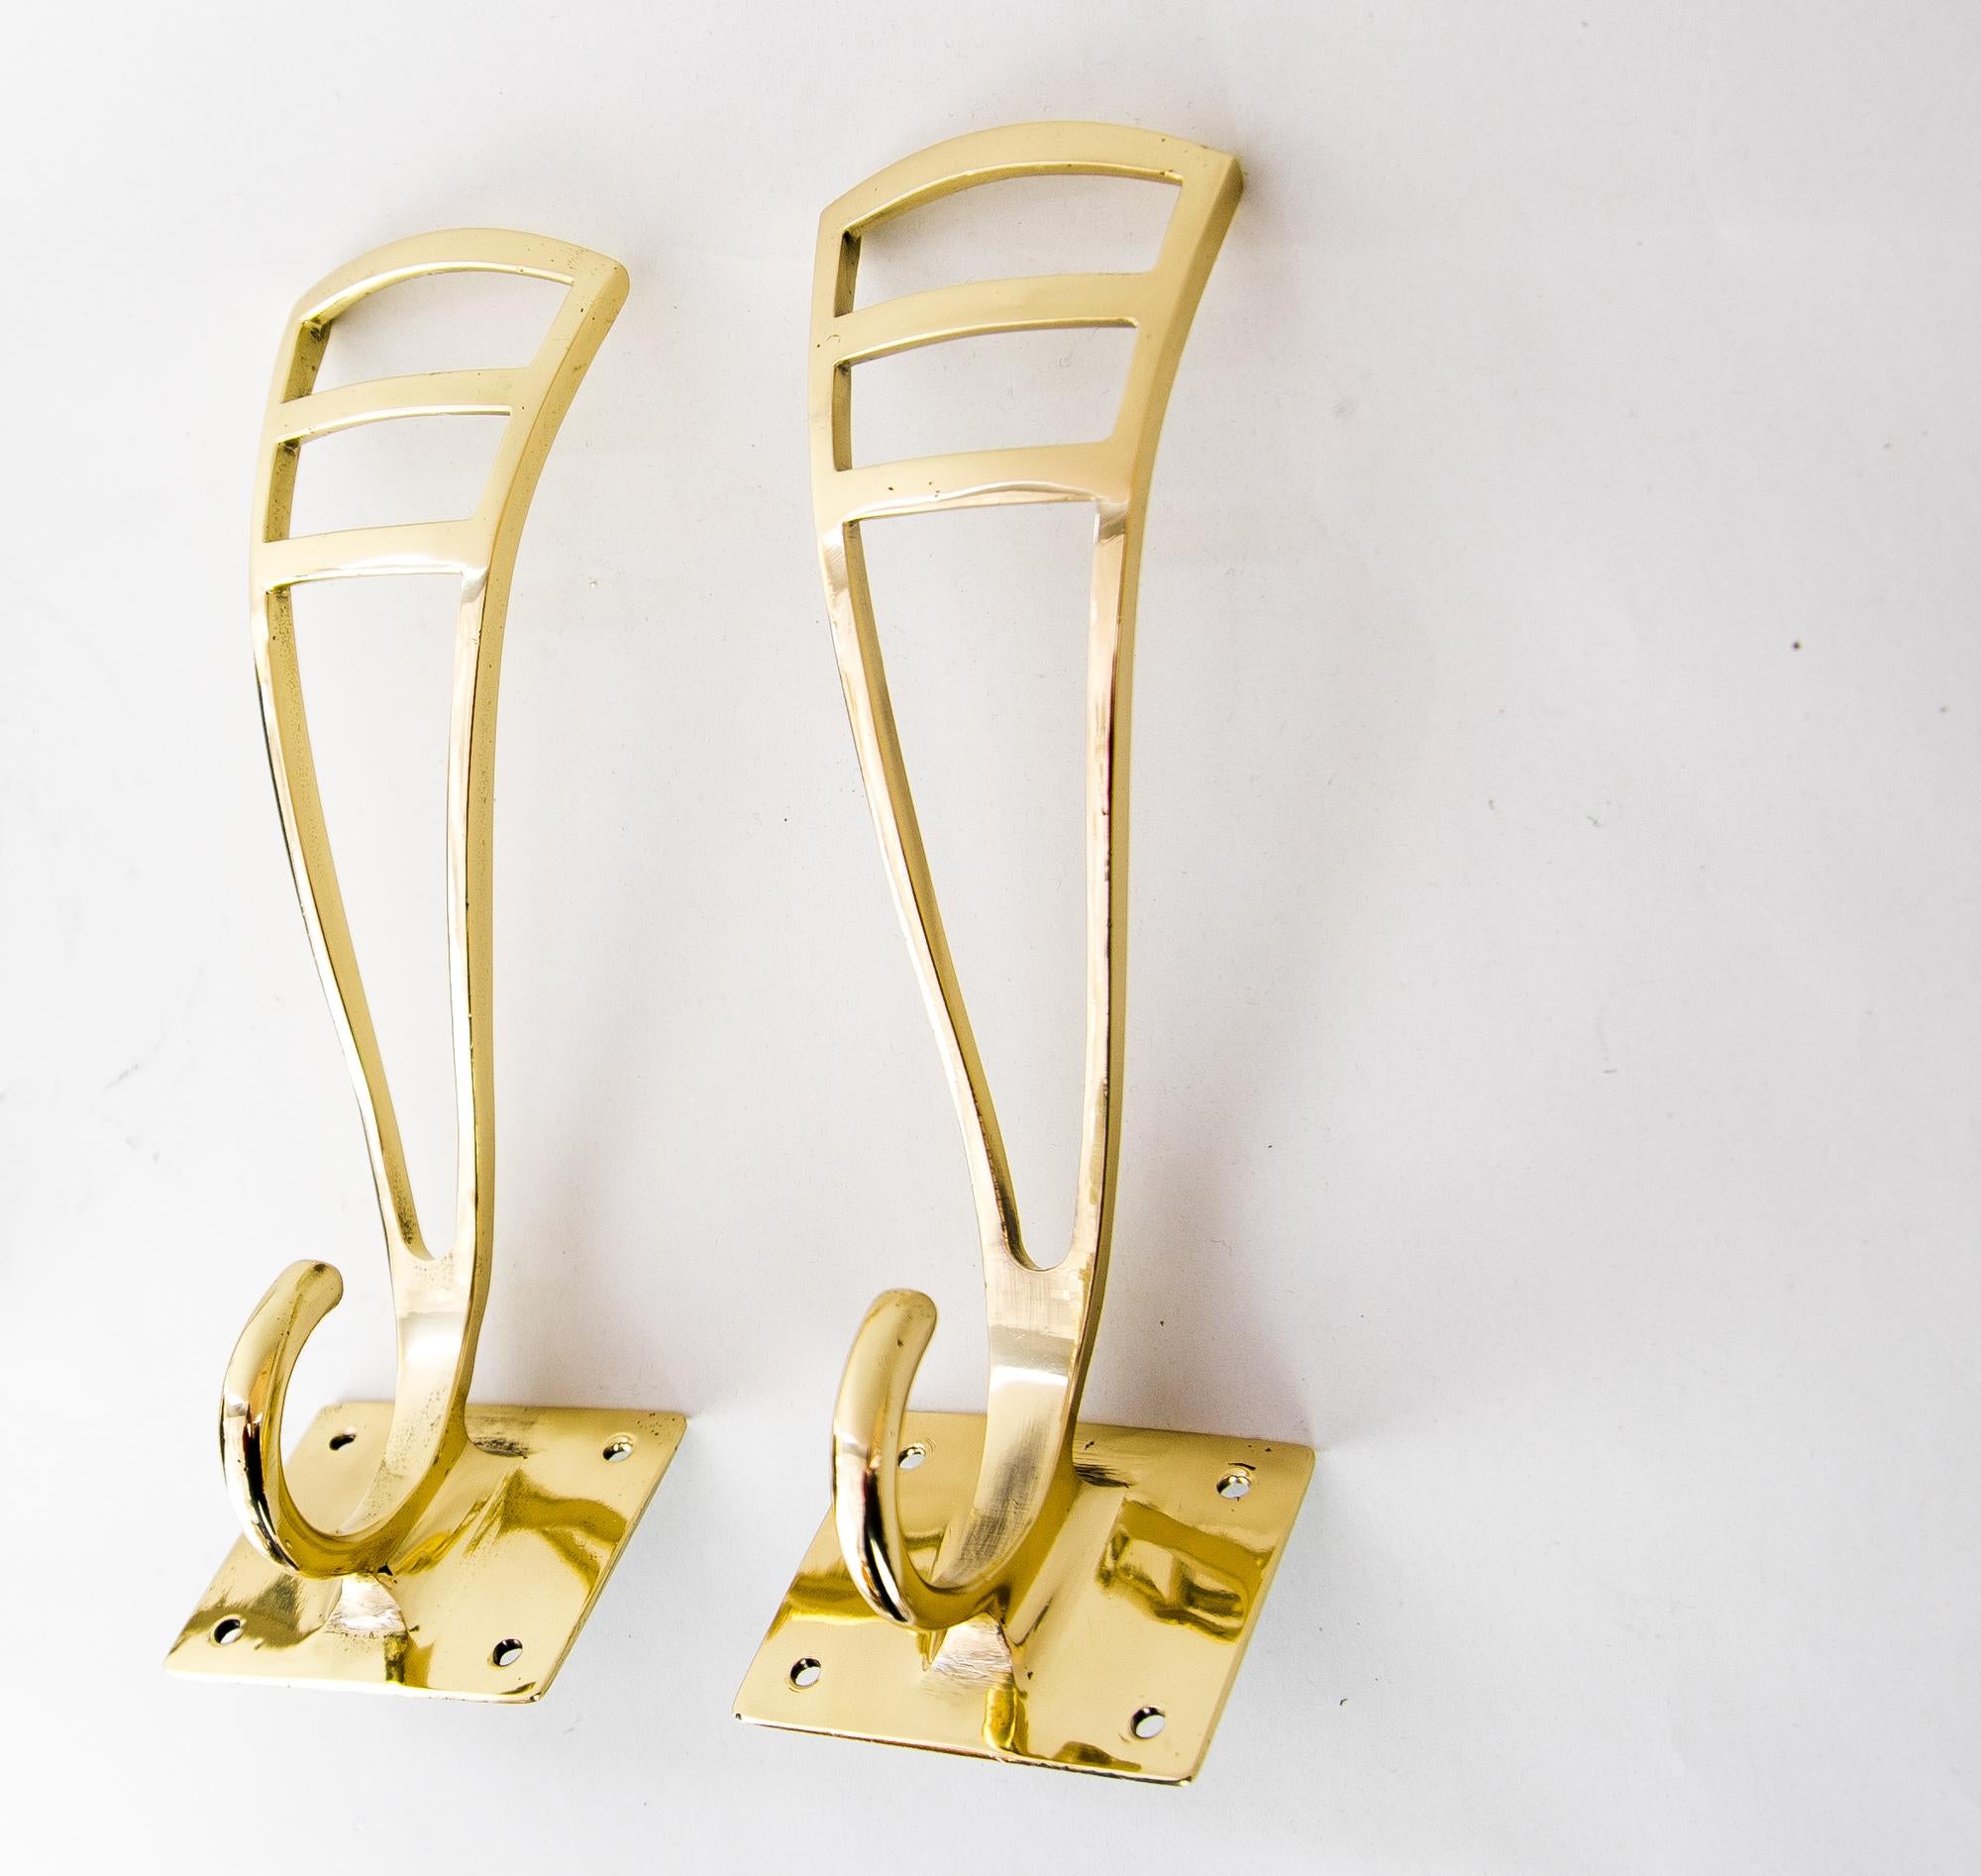 Two Art Deco wall hooks nickel-plated, Vienna, circa 1920s
Polished and stove enameled.